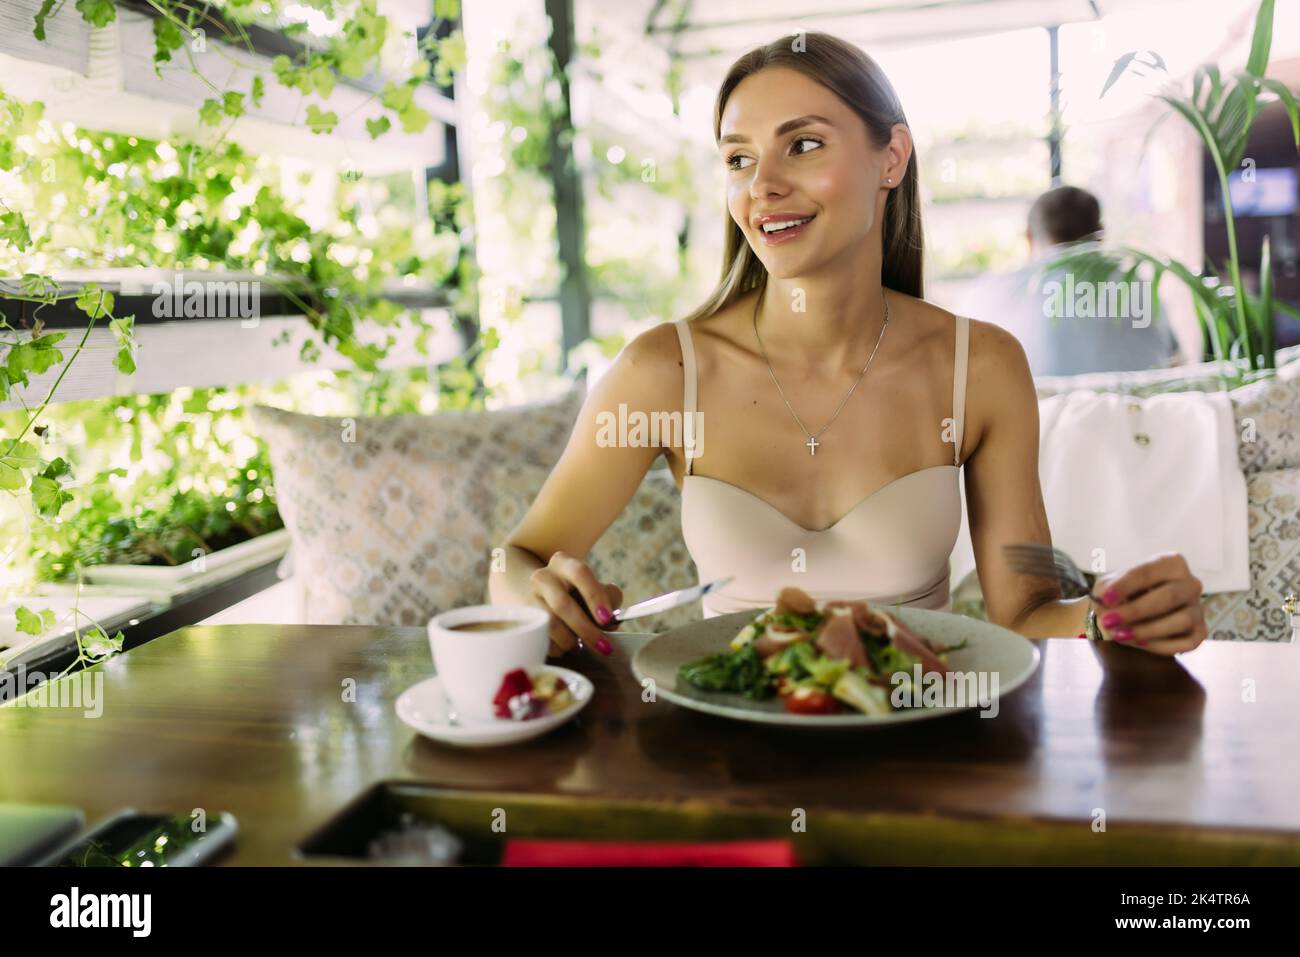 Smiling woman eating fresh salad in restaurant Stock Photo